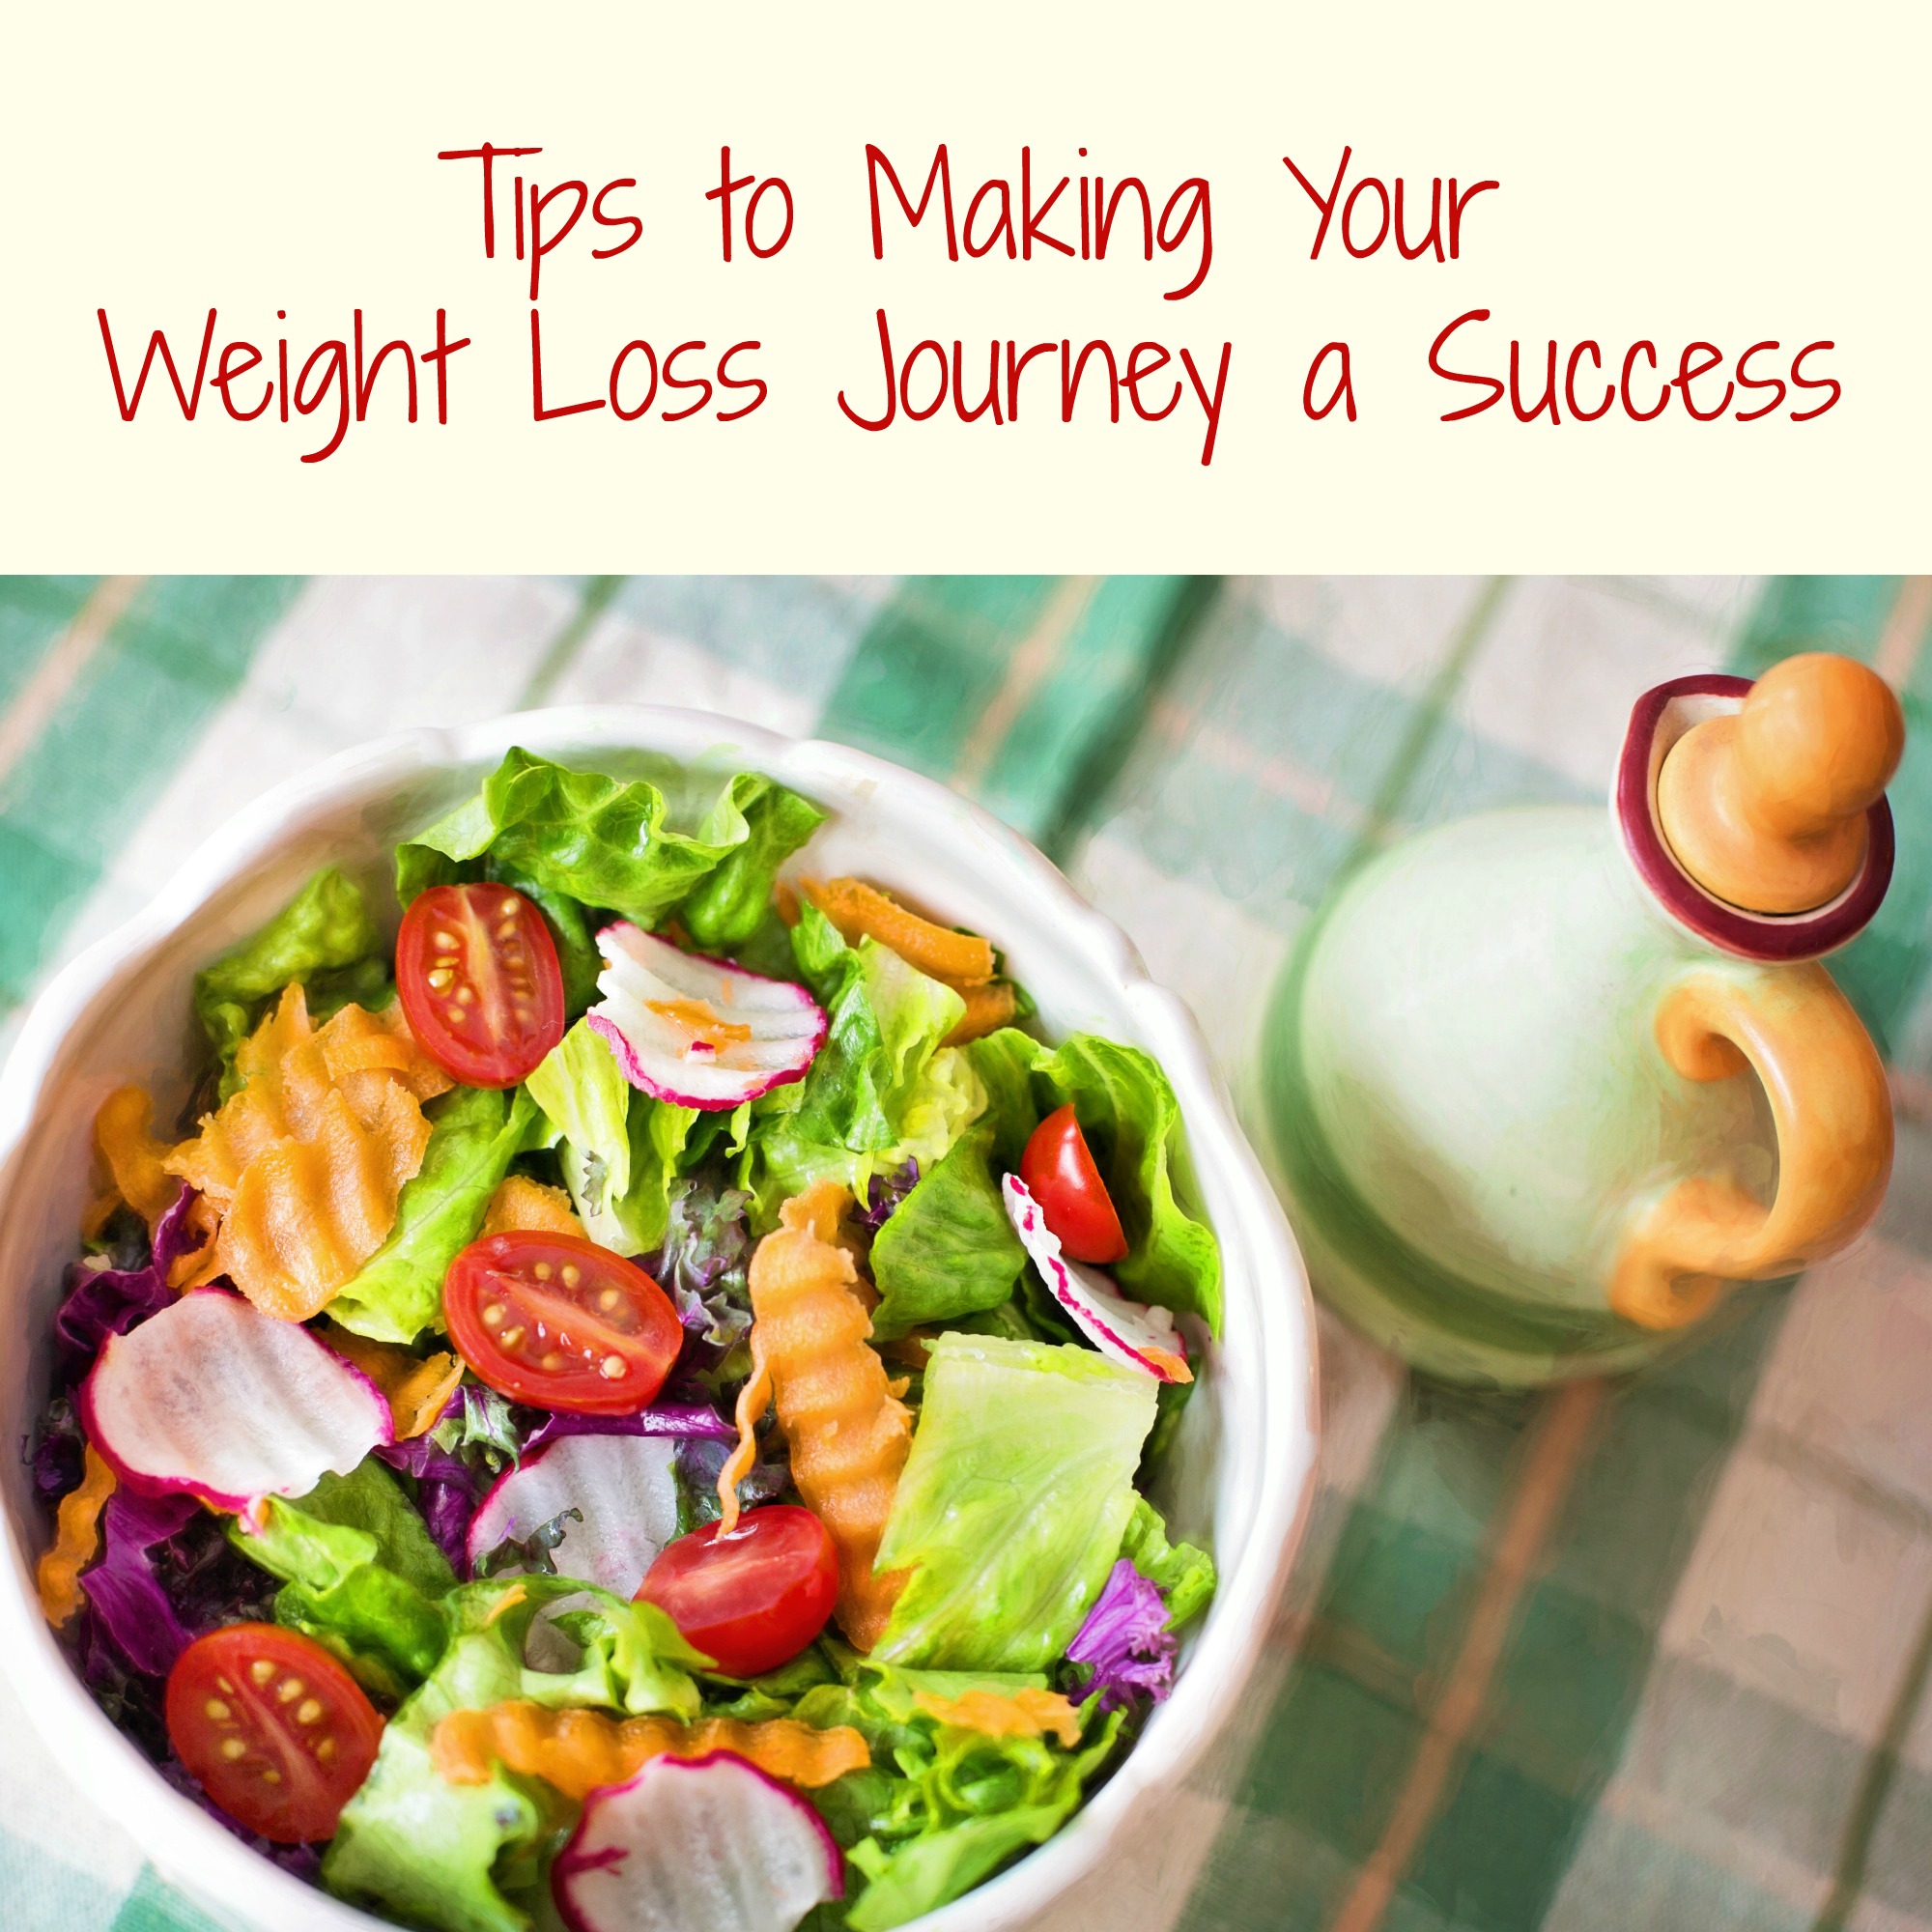 Tips to Making Your Weight Loss Journey a Success